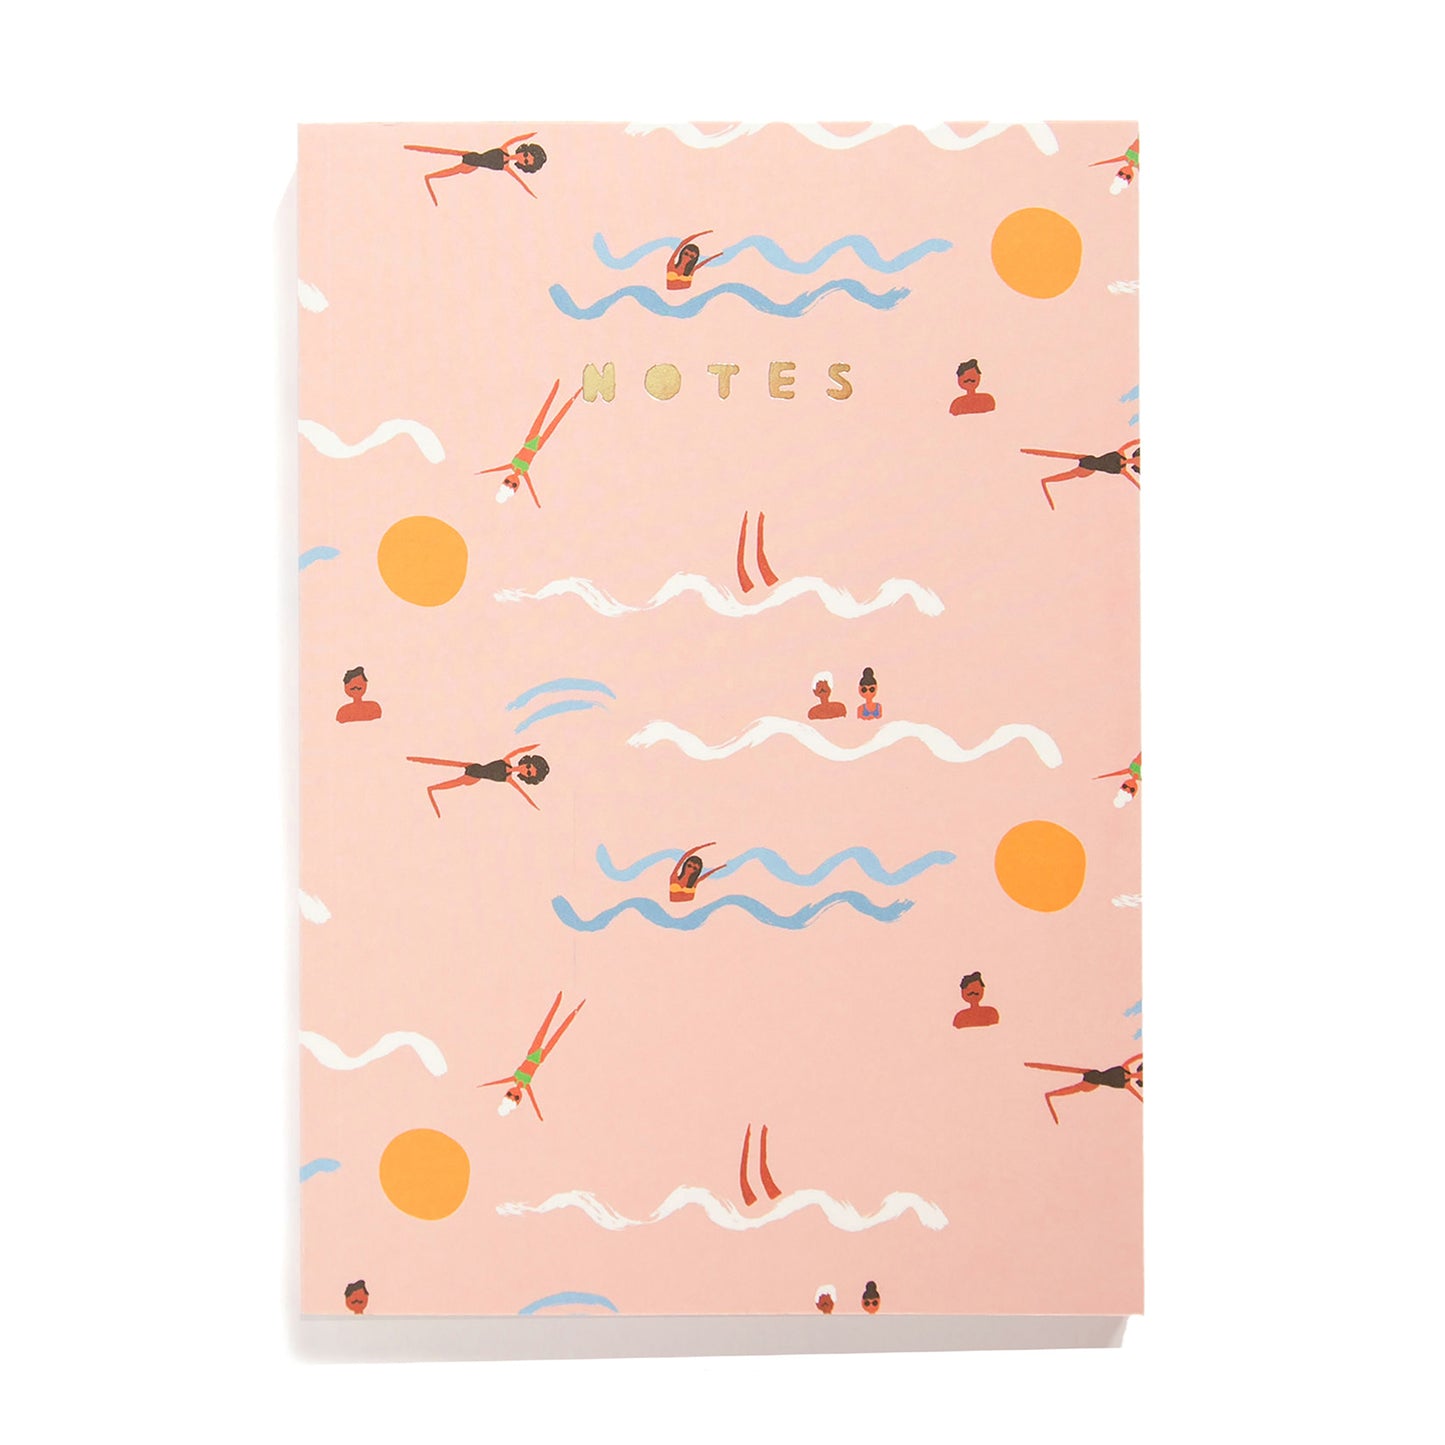 SWIMMERS - Large Notebook